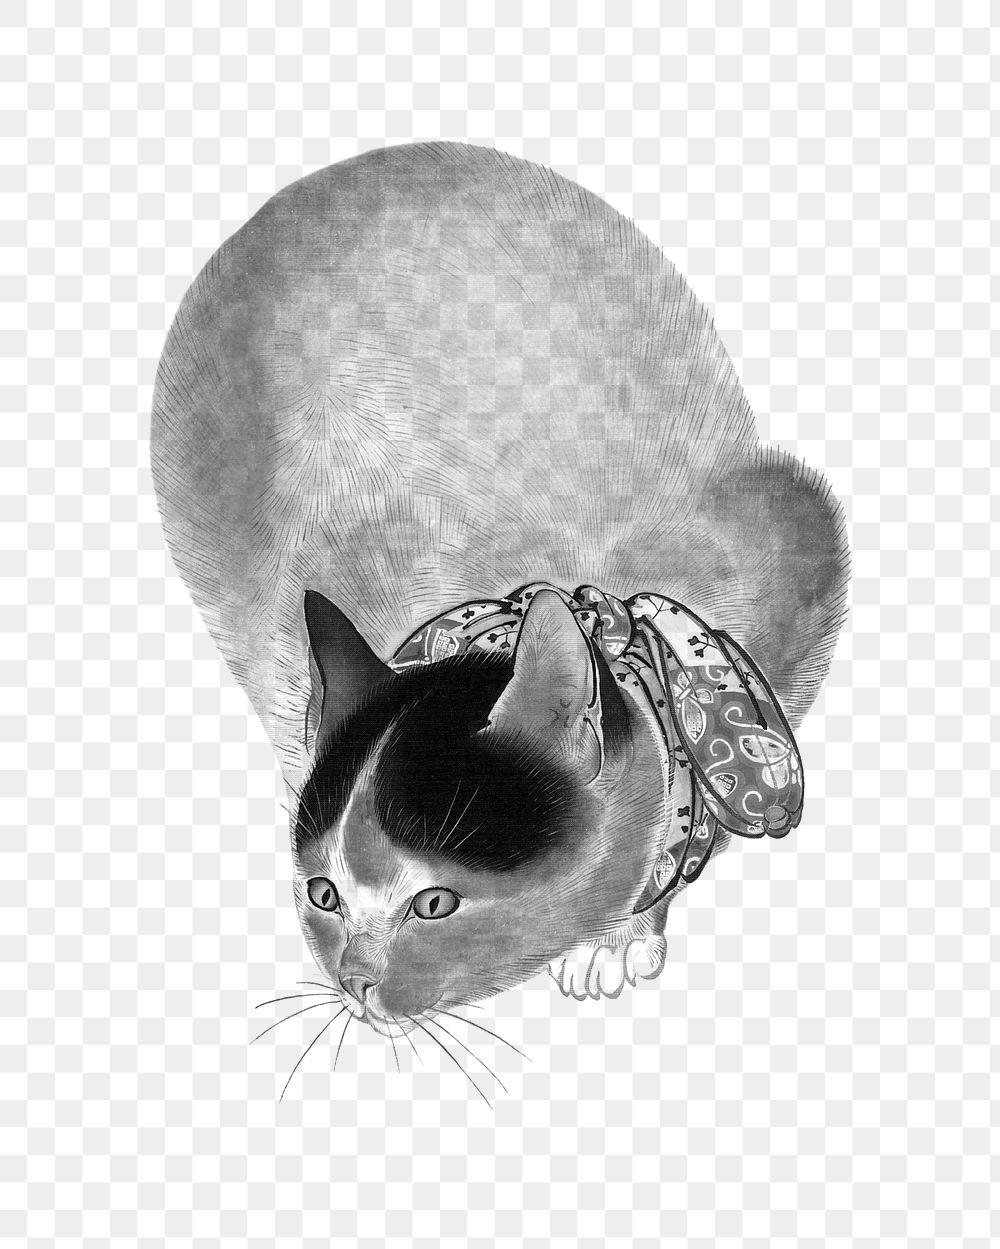 PNG Cat, vintage animal illustration by Oide Tōkō, transparent background.  Remixed by rawpixel. 